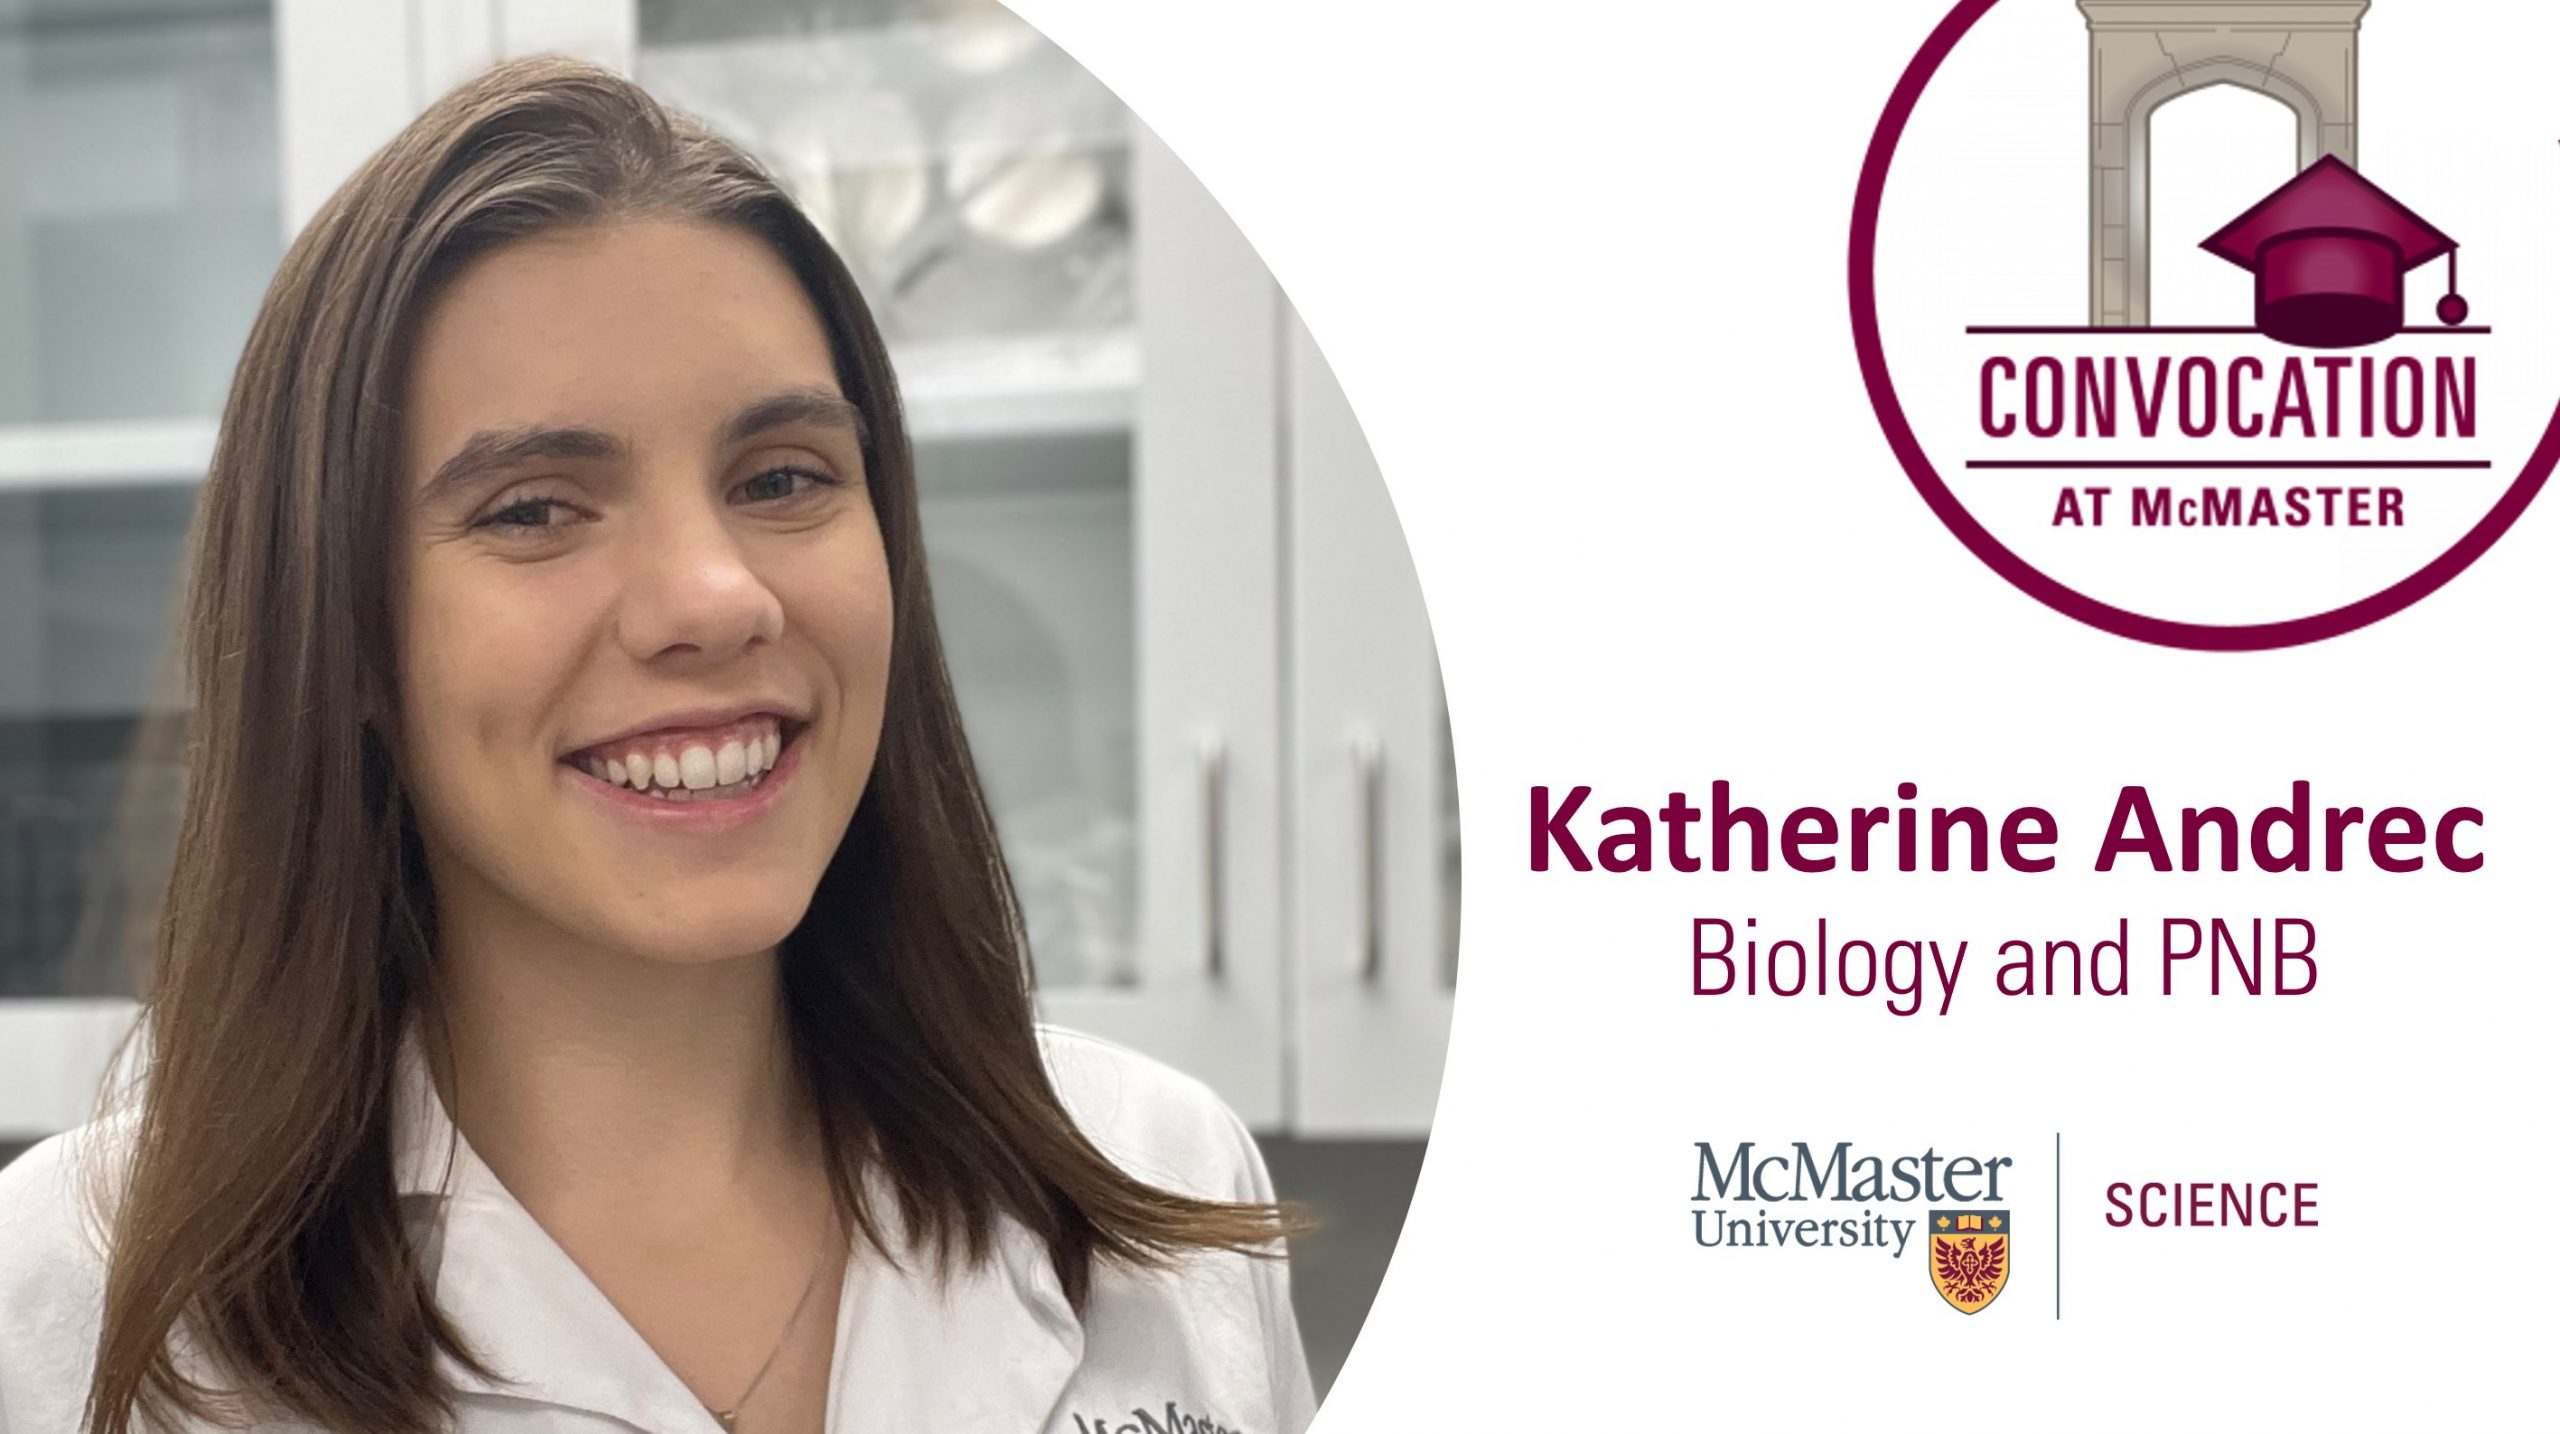 Portrait of Katherine Andrec with the convocation logo and mcmaster science logo